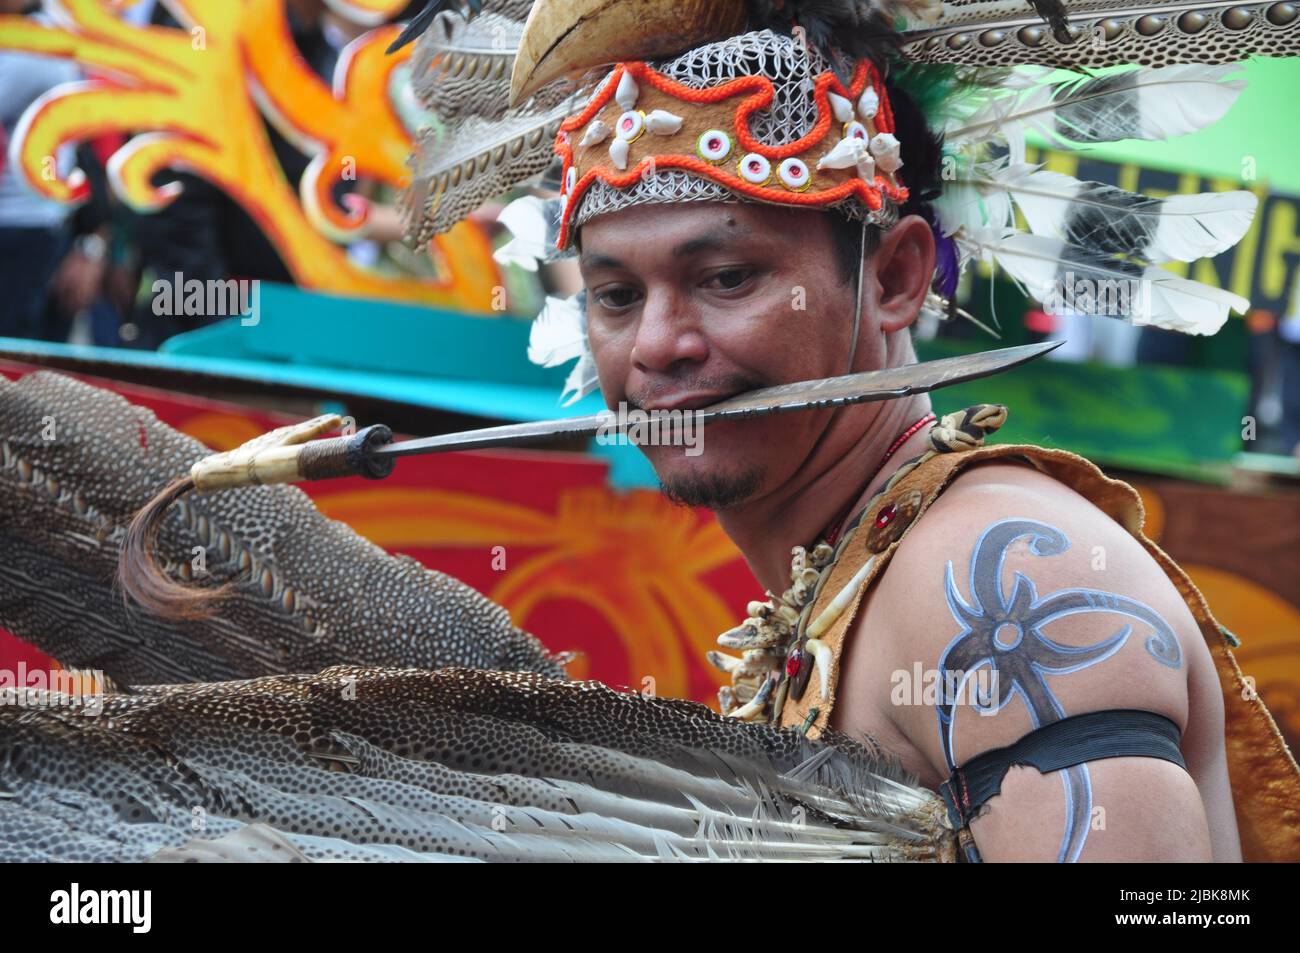 Jakarta, Indonesia - April 28, 2013 : A participant at the Dayak Festival in Jakarta, Indonesia, poses while biting Mandau, the Dayak traditional mach Stock Photo